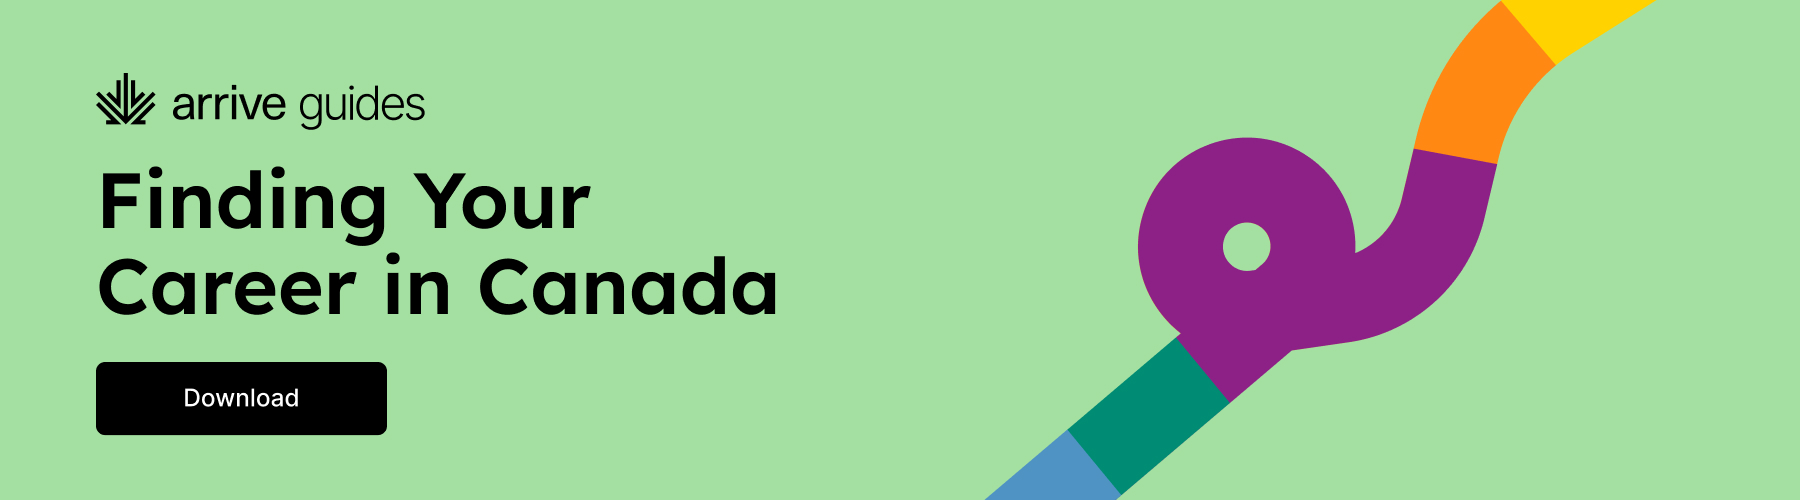 Download our newcomer's guide to finding your career in Canada